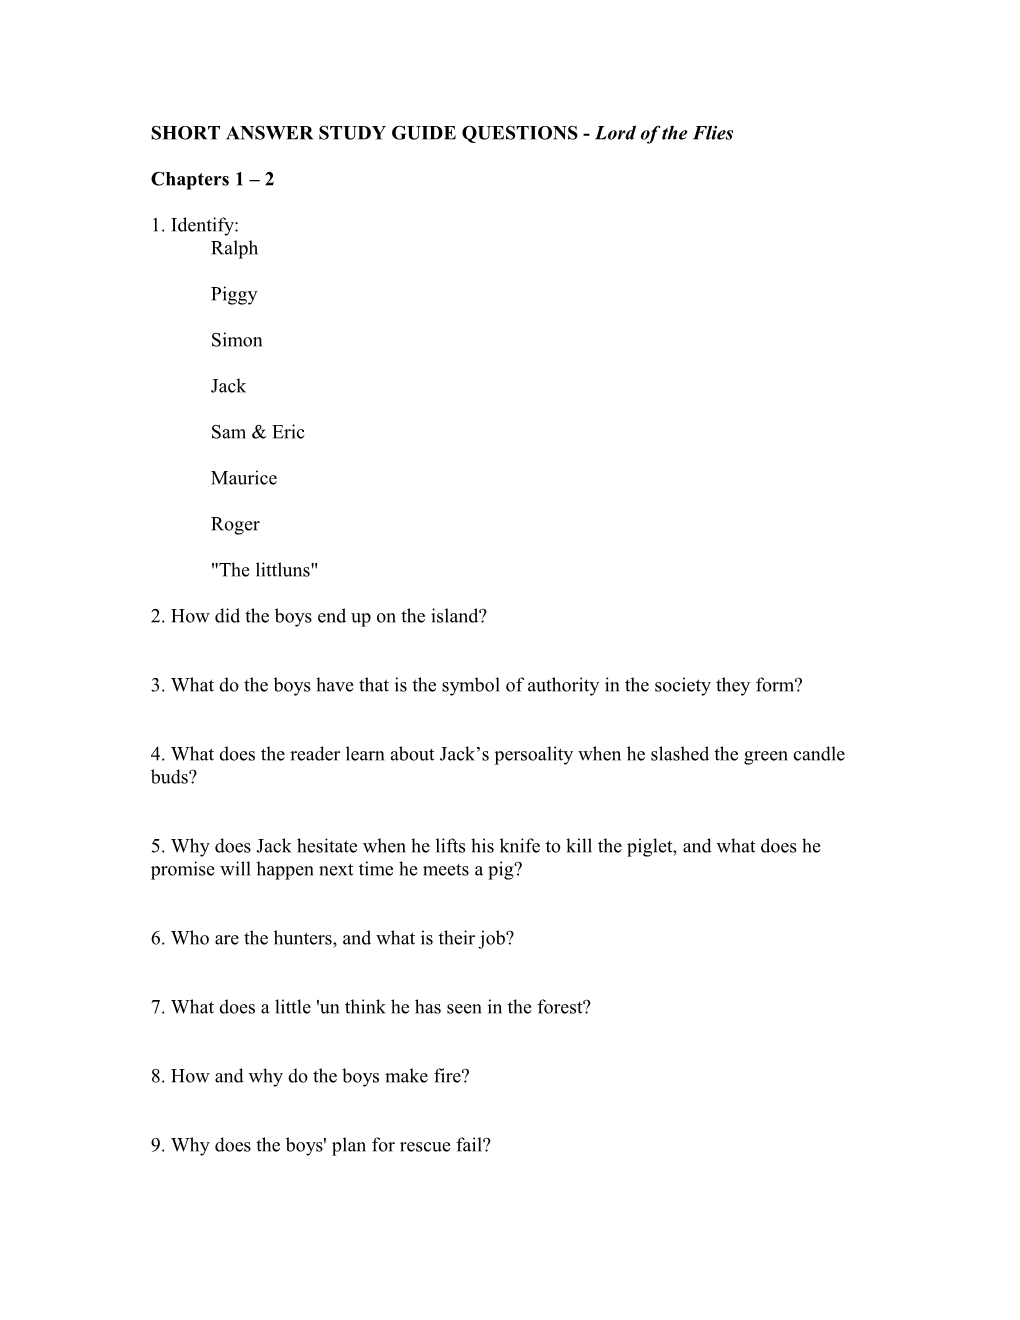 SHORT ANSWER STUDY GUIDE QUESTIONS - Lord of the Flies